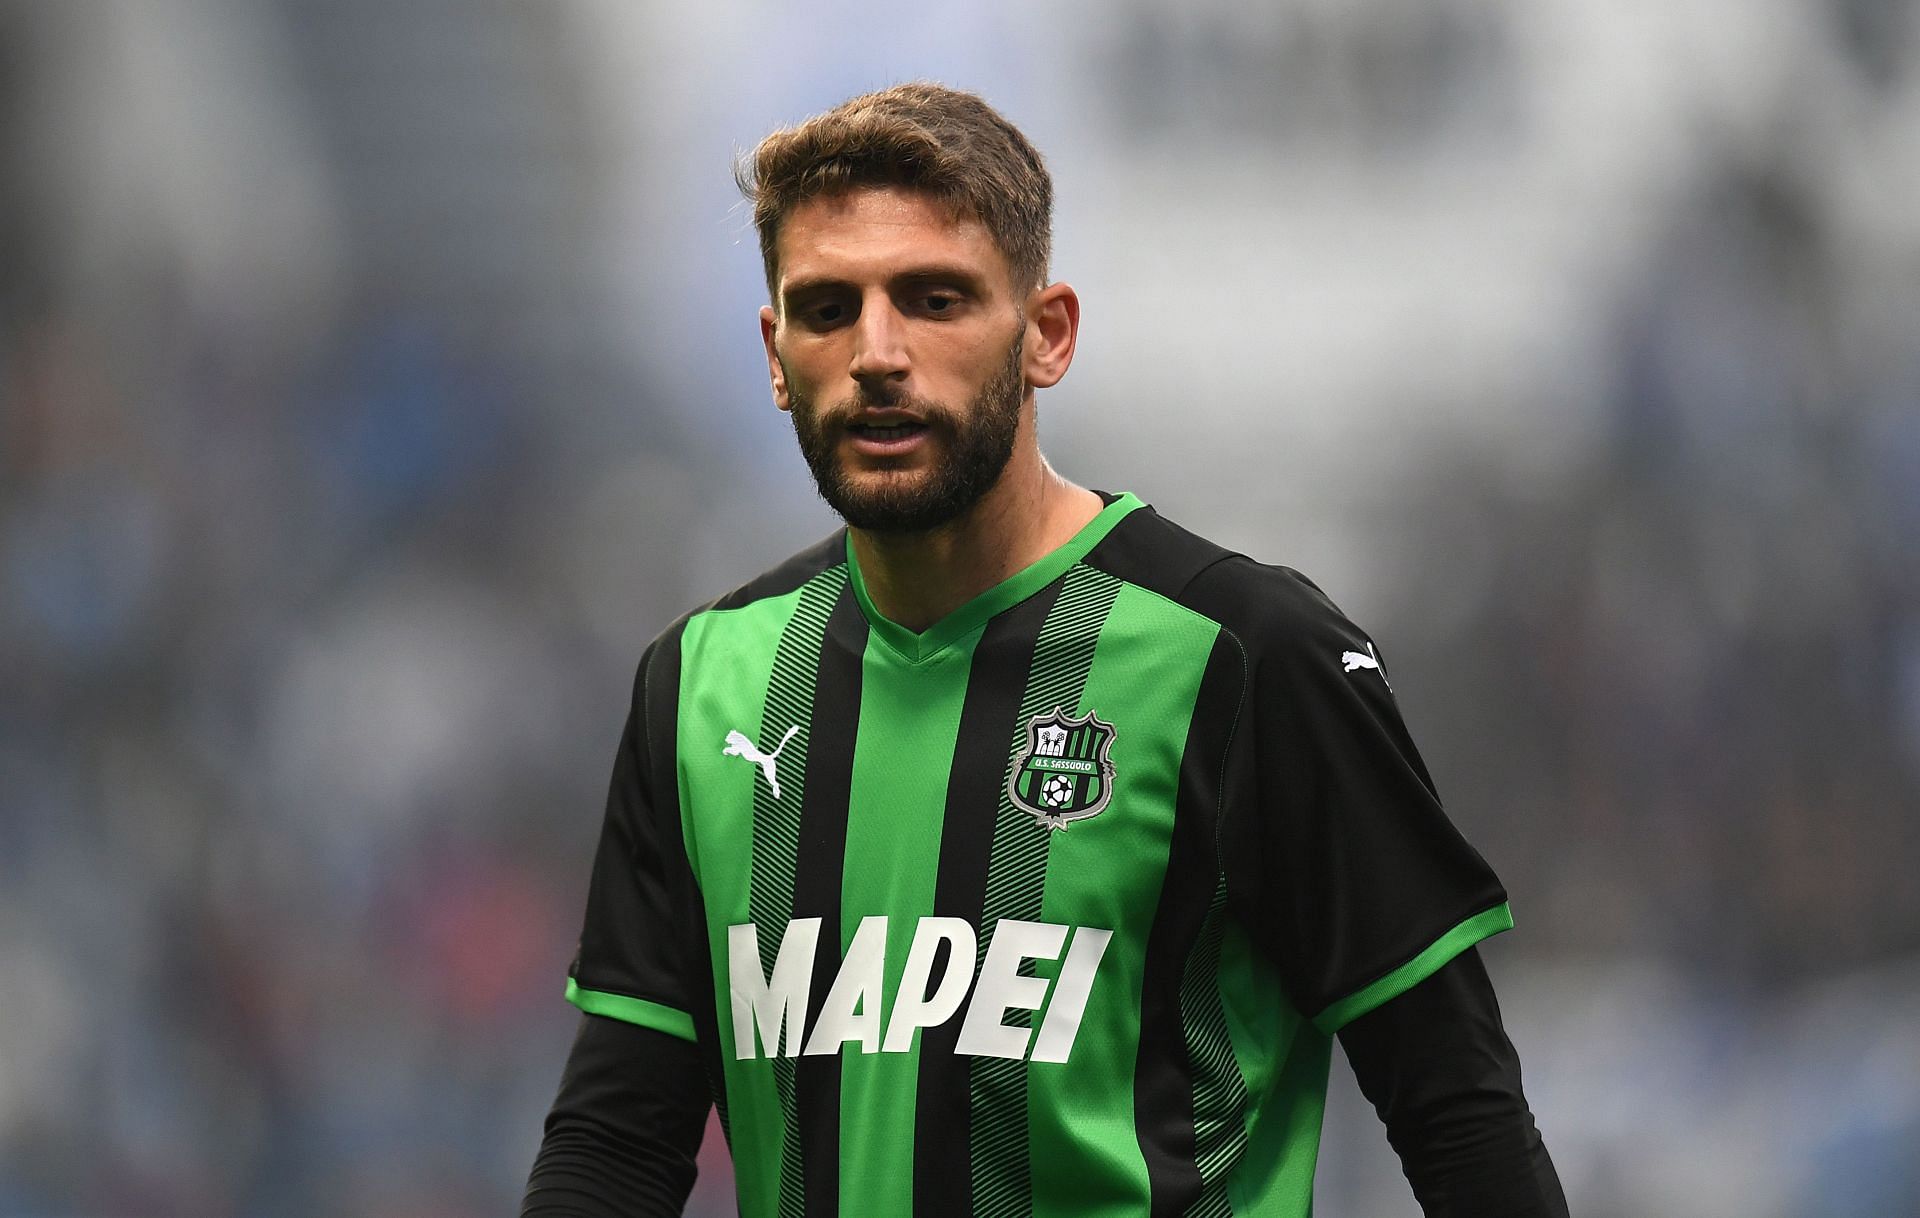 Berardi remains a huge force to be reckoned with in Serie A this season.